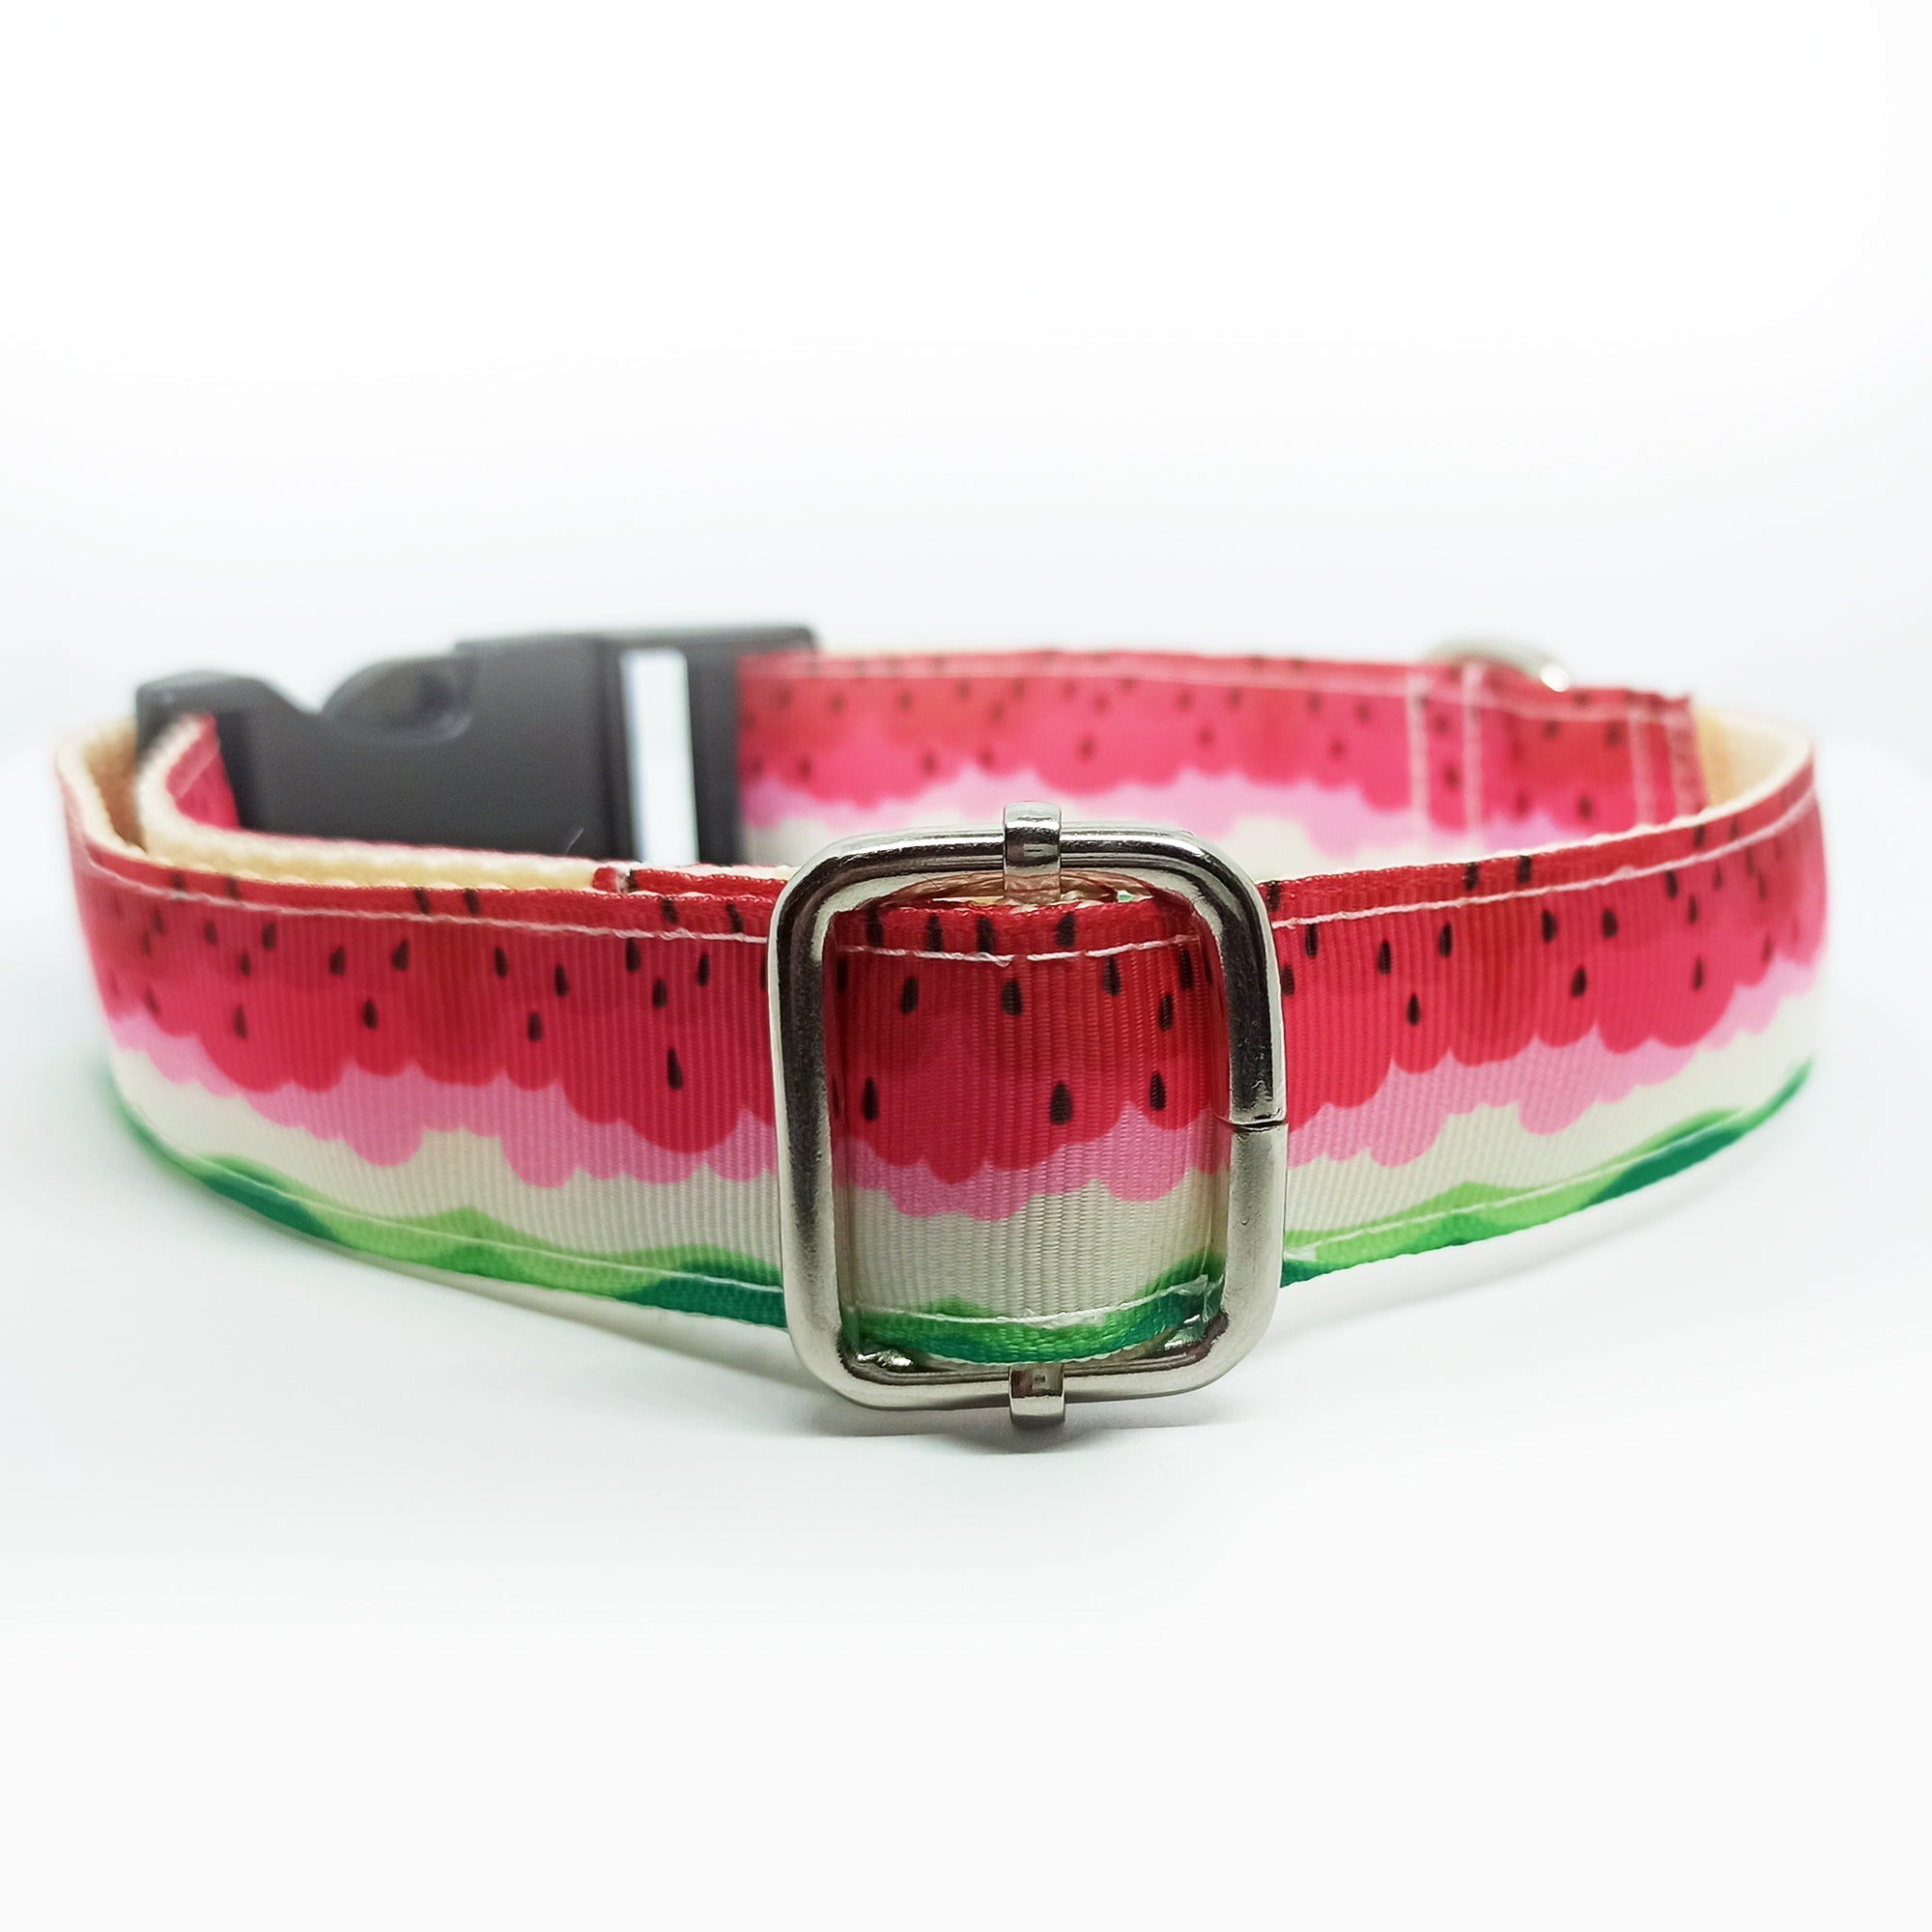 Watermelon Cute fruit Dog Collar - S-L sizes with custom matching pet tag - Adventures of Rubi